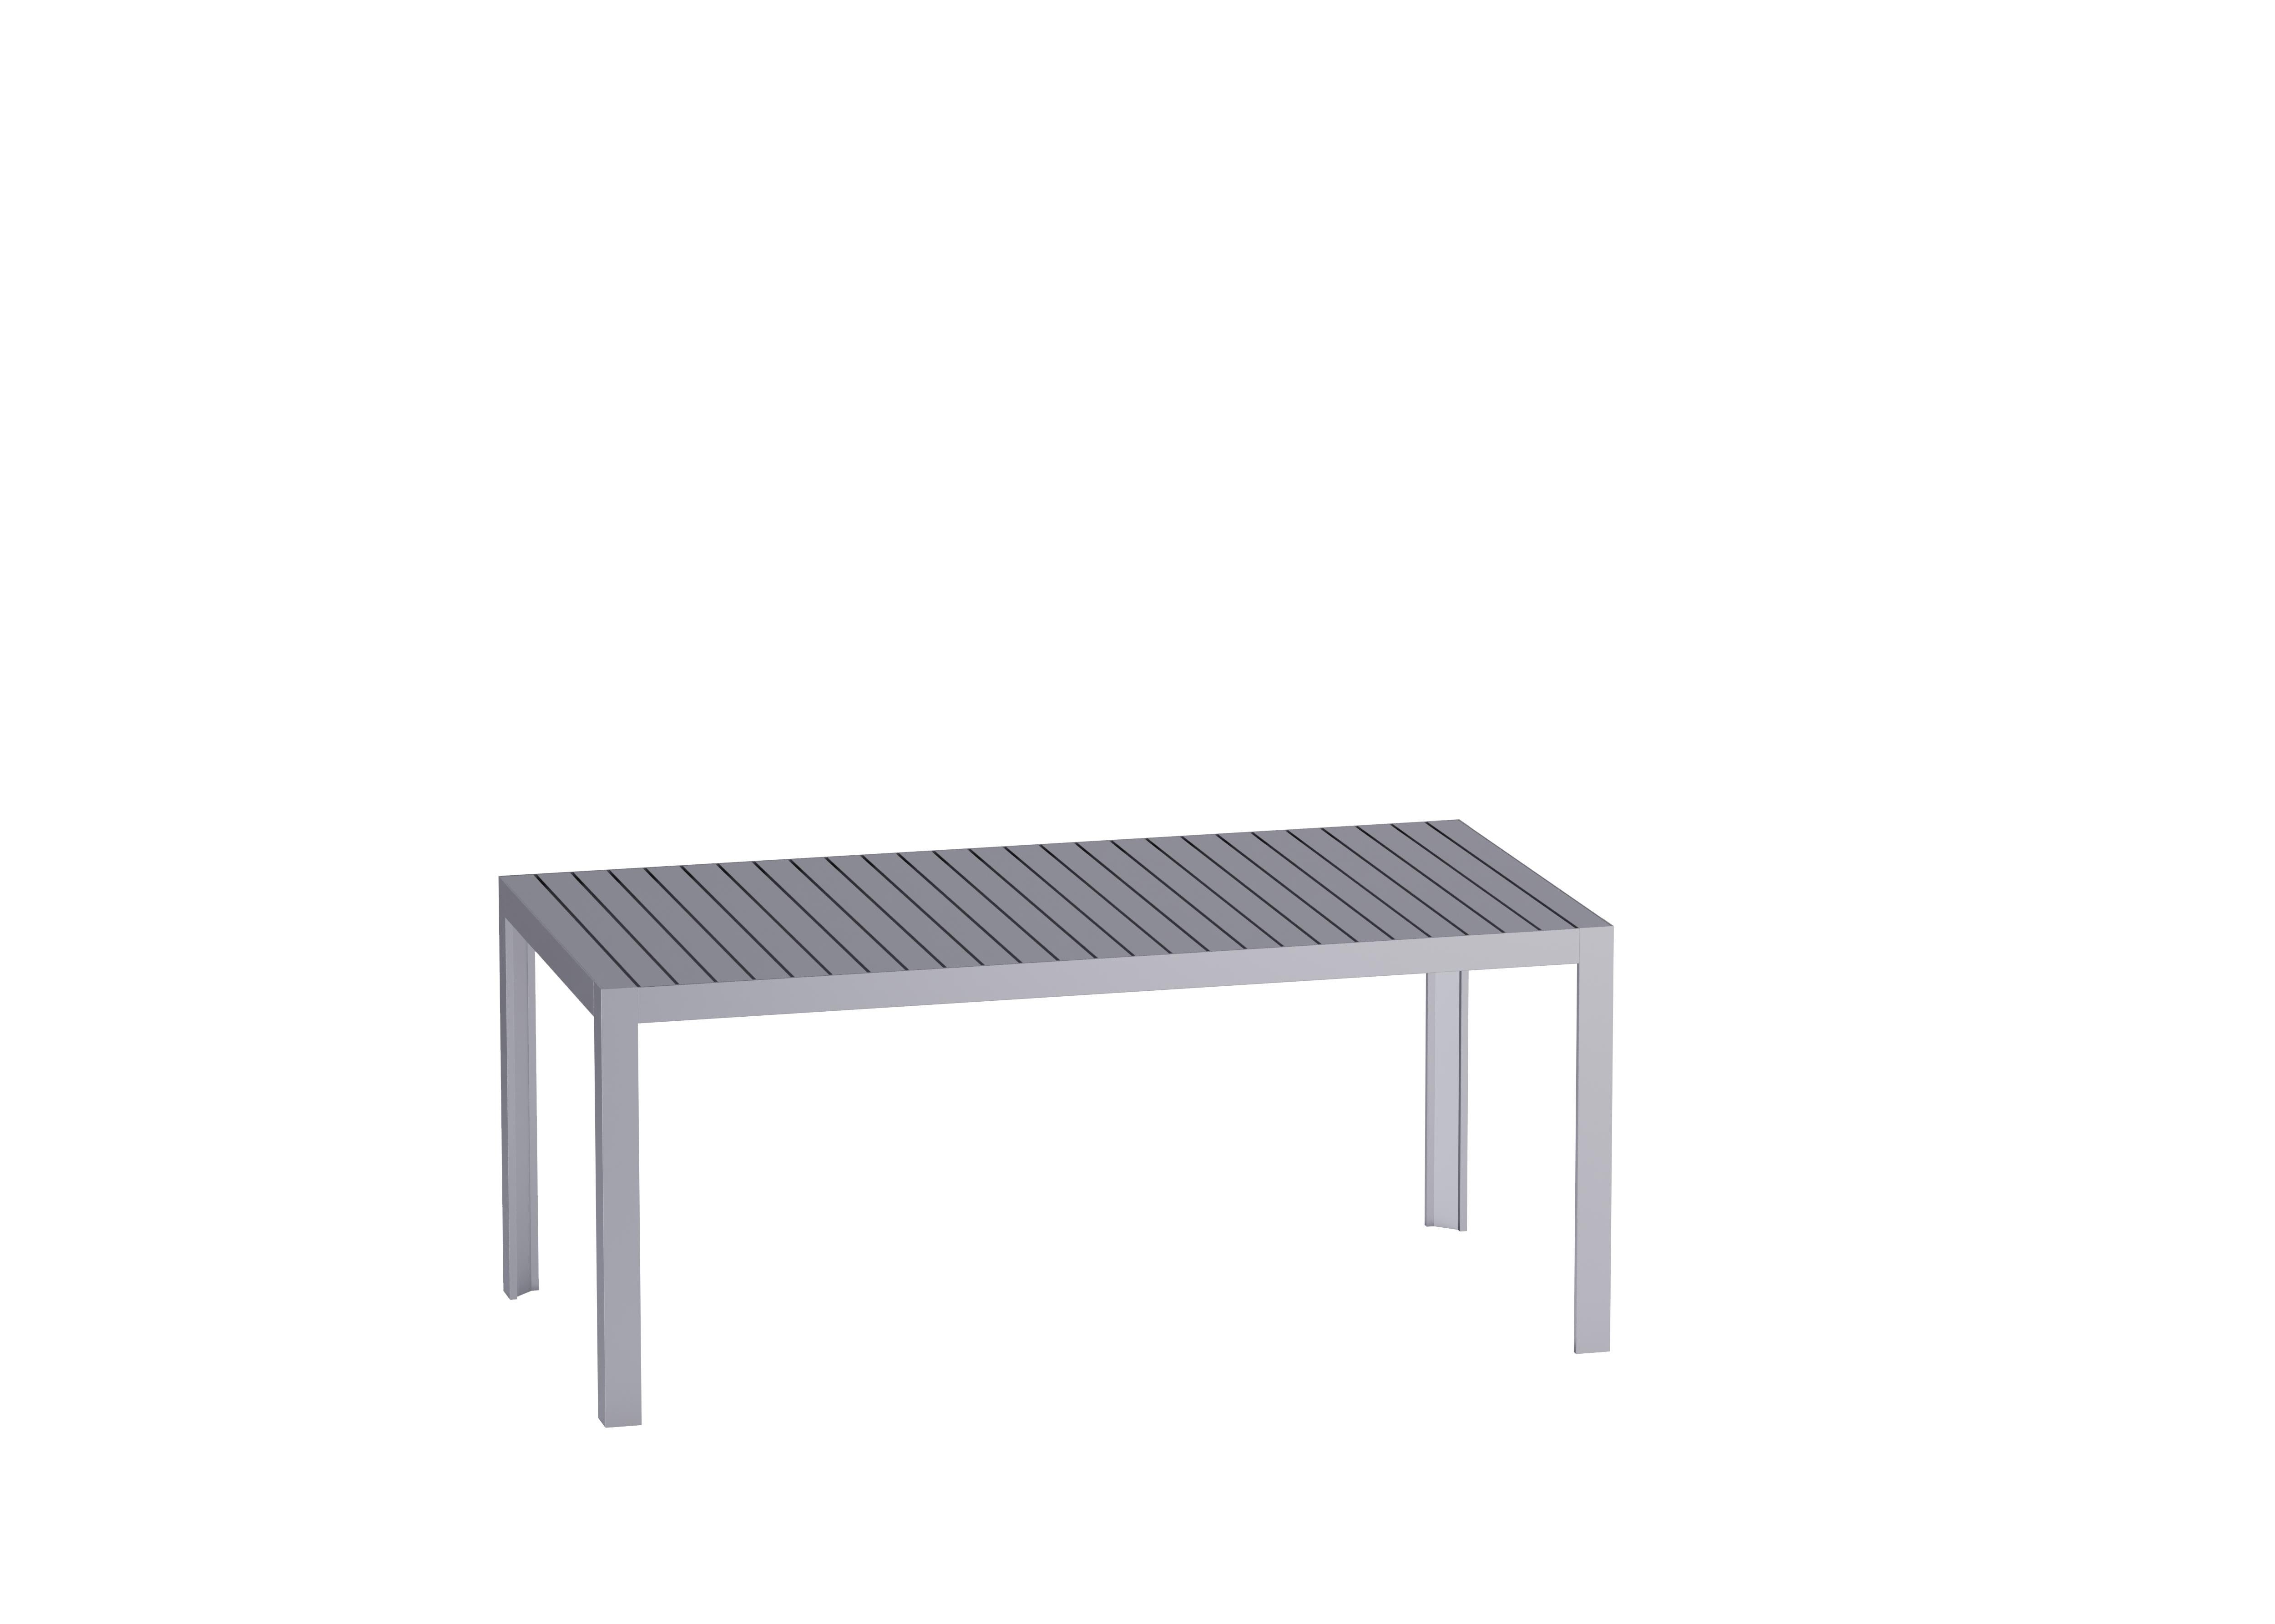 Kalimba, a name inspired by an ancient African percussion instrument, is the new outdoor table designed by DriadeLab, the company’s research centre and creative heart.
An innovative aluminium table with a slatted effect top, eco-sustainable and